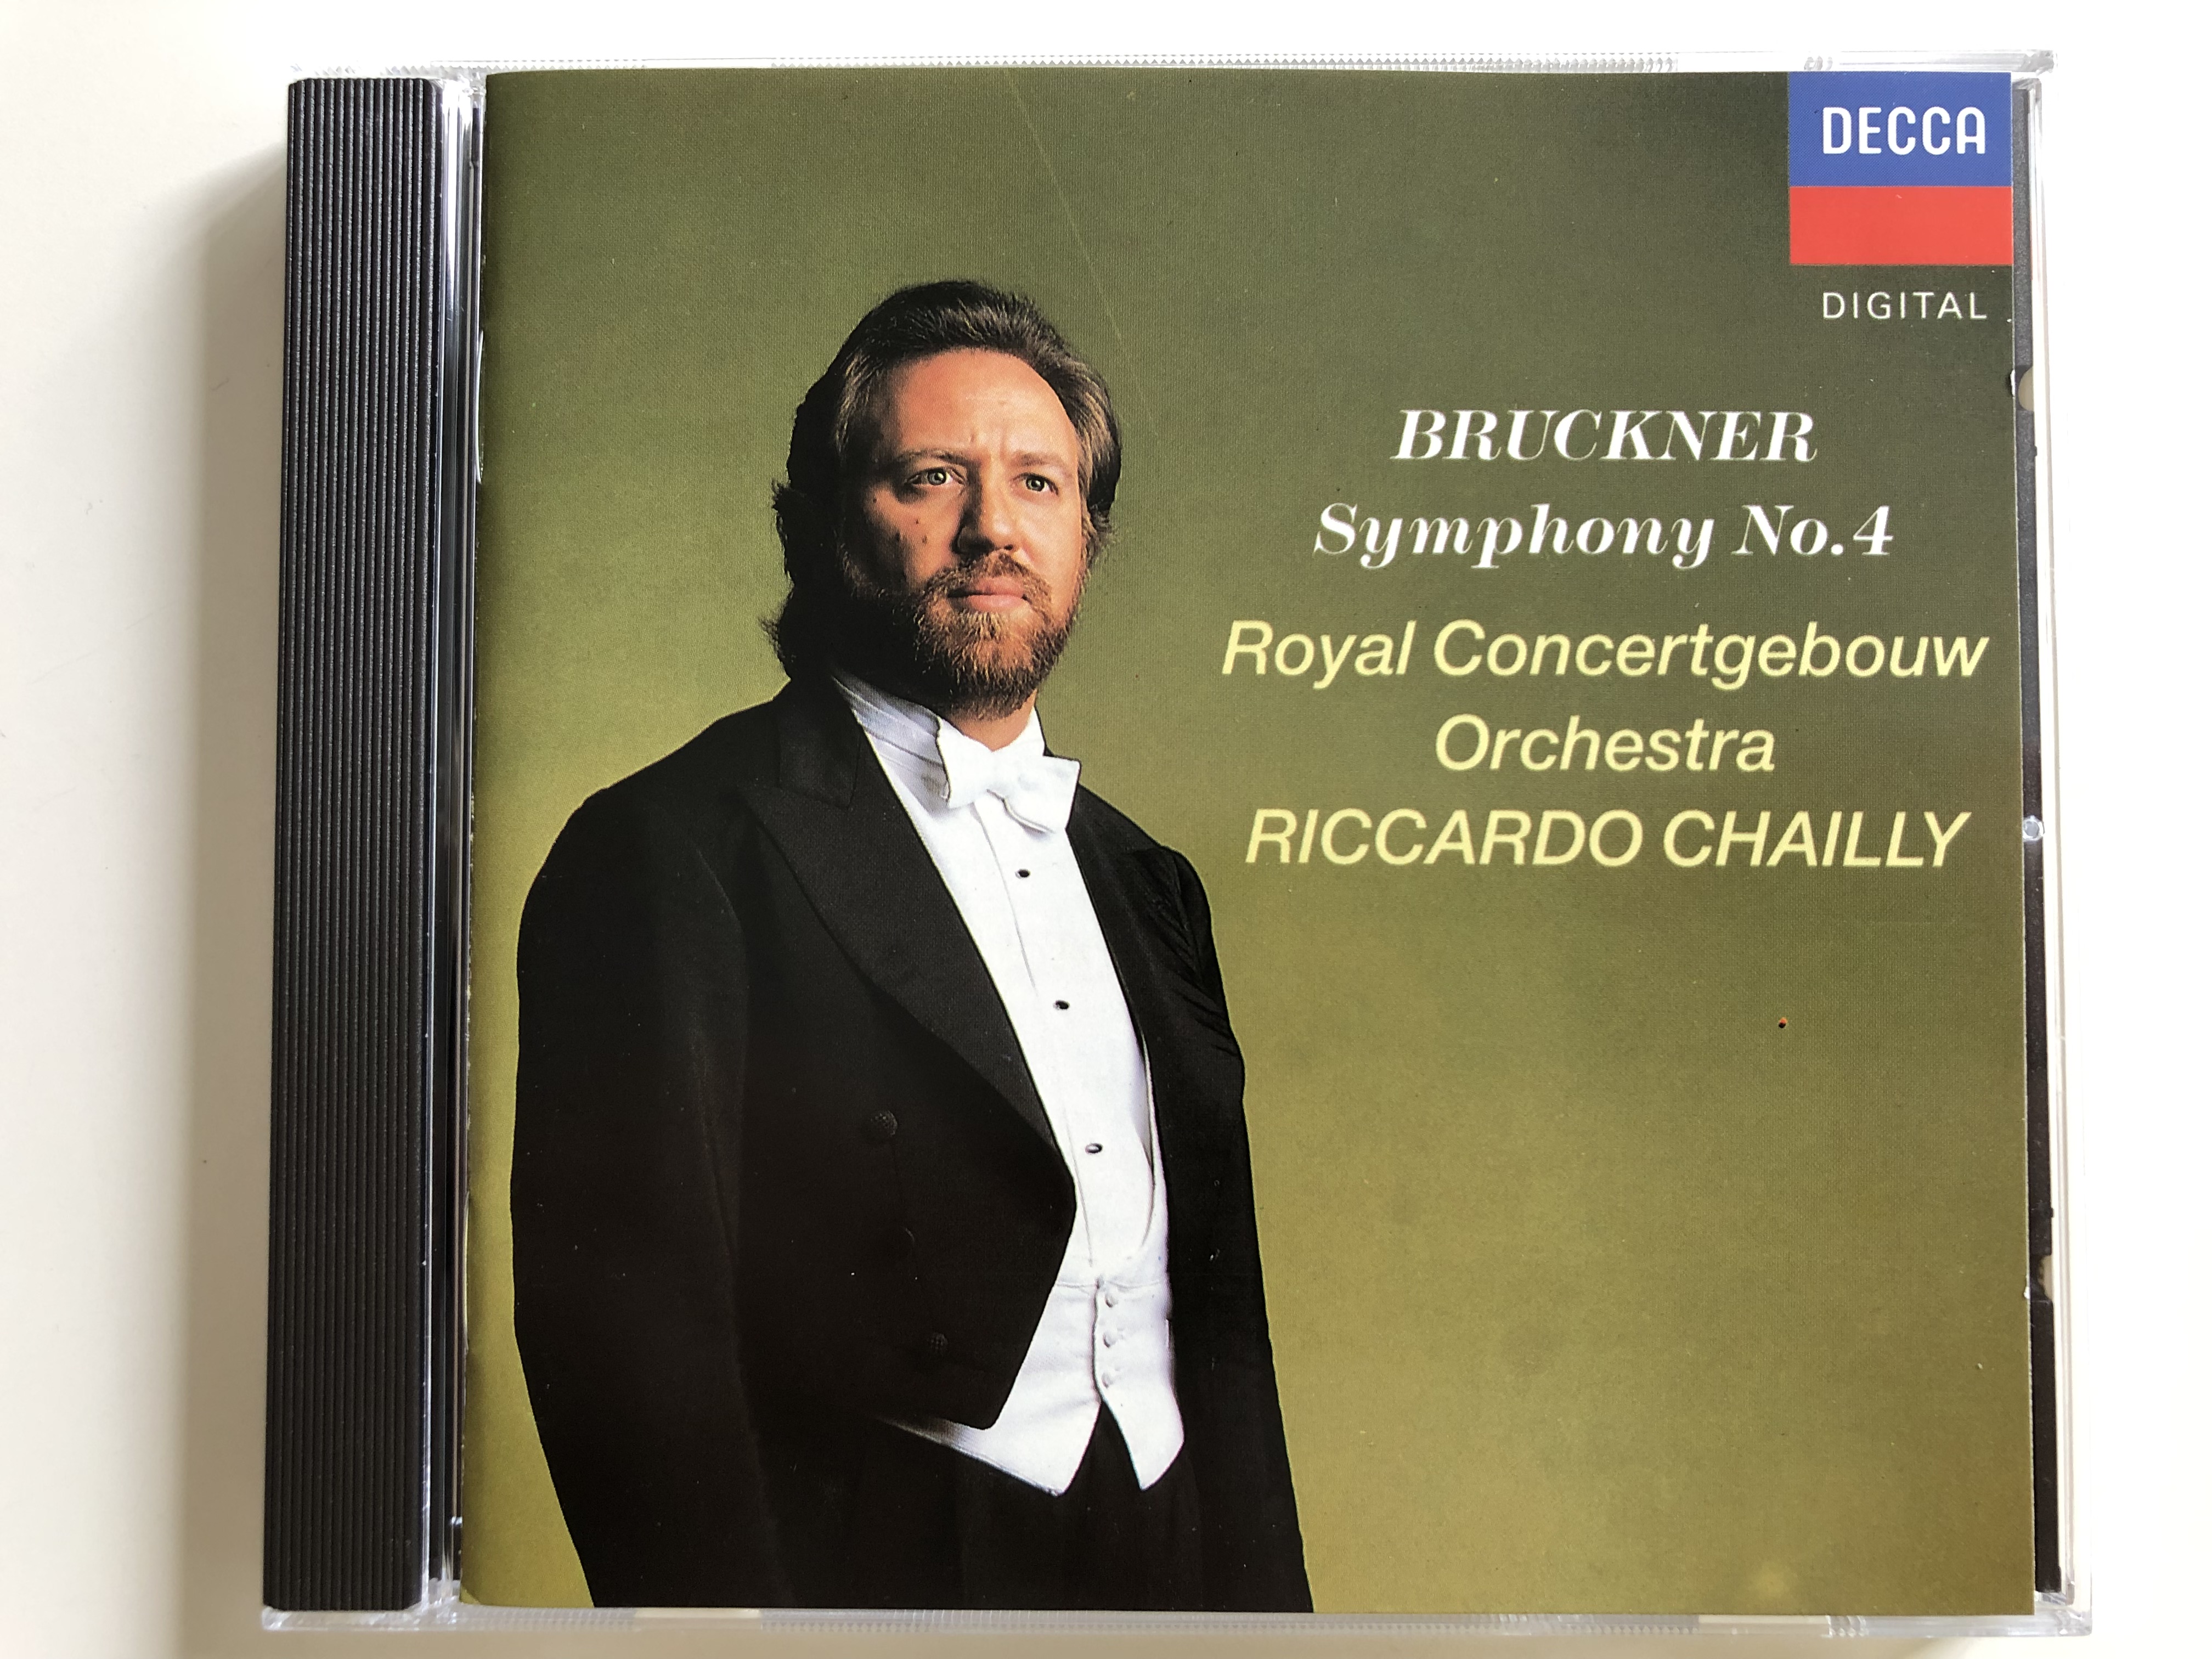 bruckner-symphony-no.-4-royal-concertgebouw-orchestra-conducted-by-riccardo-chailly-decca-audio-cd-1990-425-613-2-1-.jpg